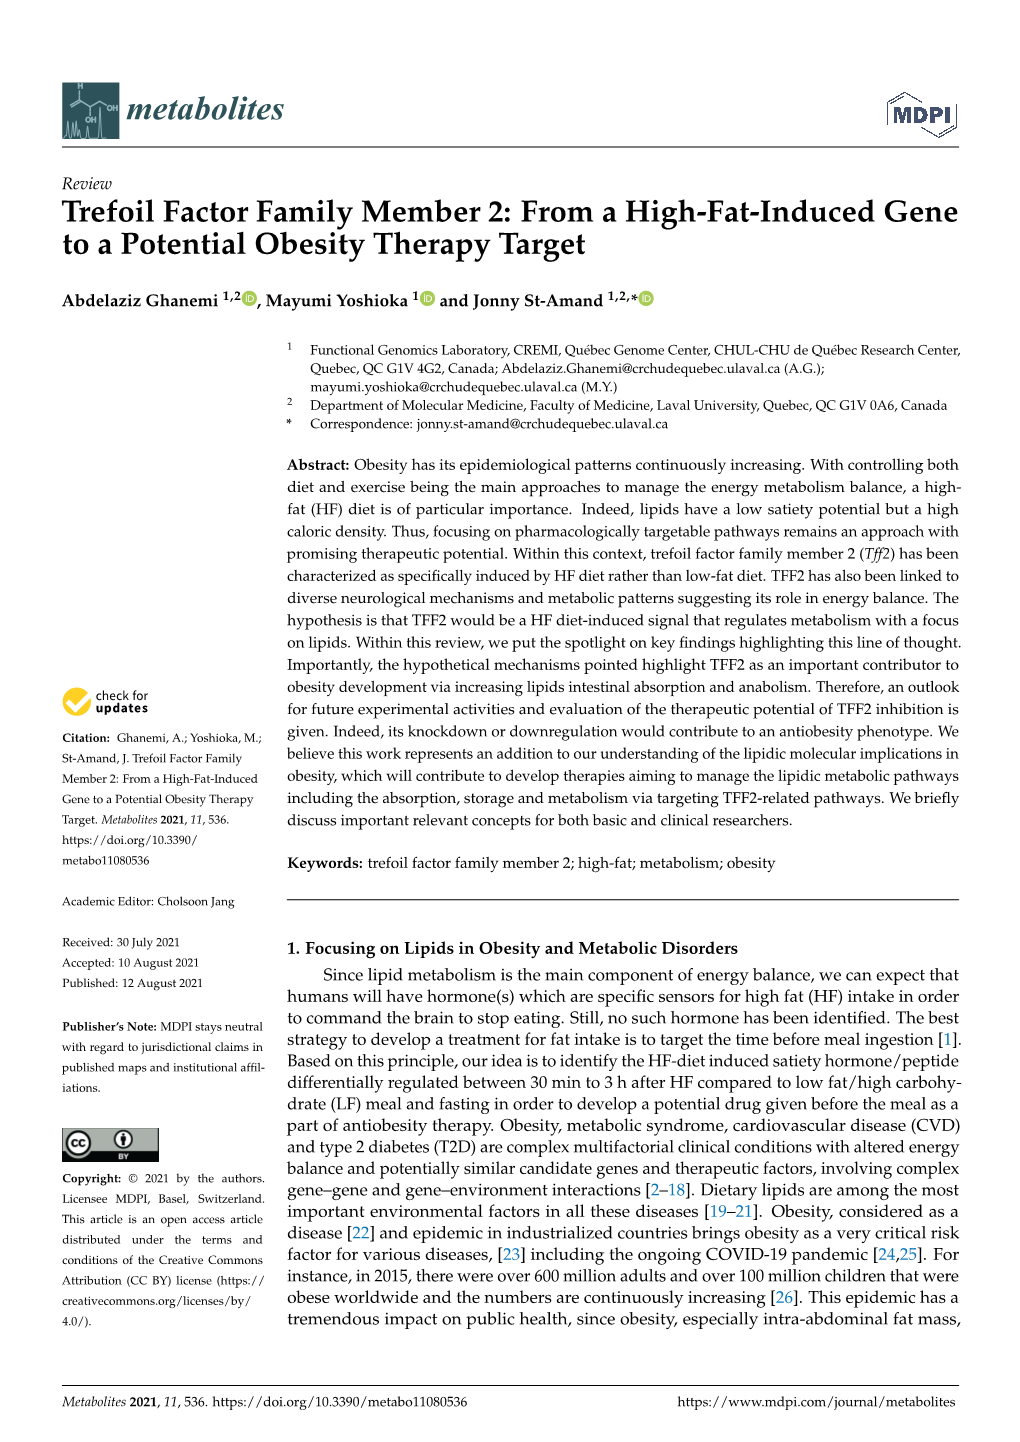 Trefoil Factor Family Member 2: from a High-Fat-Induced Gene to a Potential Obesity Therapy Target